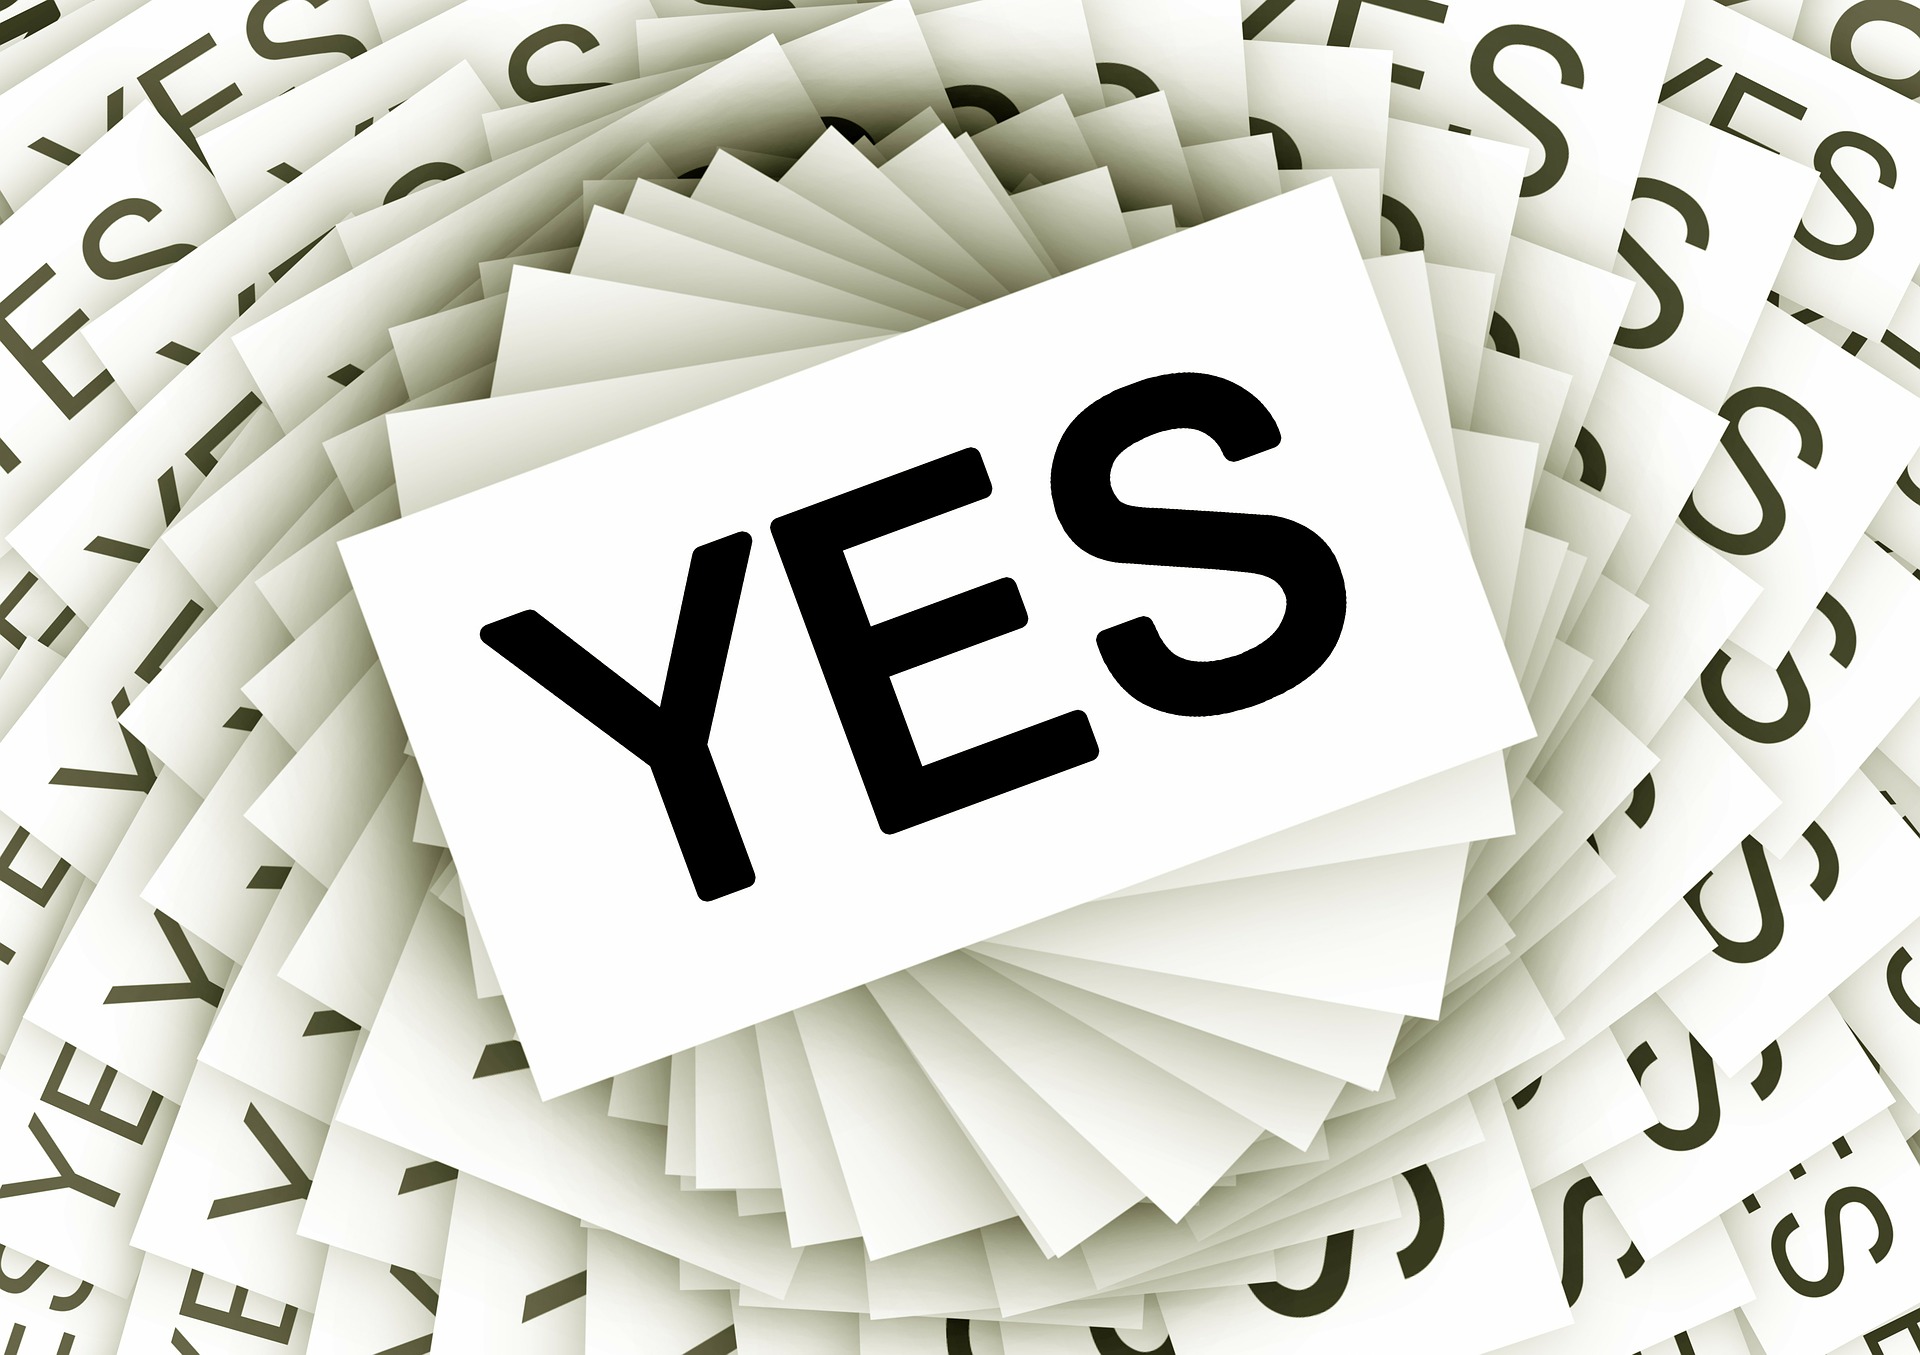 Copies of yes printed on many pieces of paper